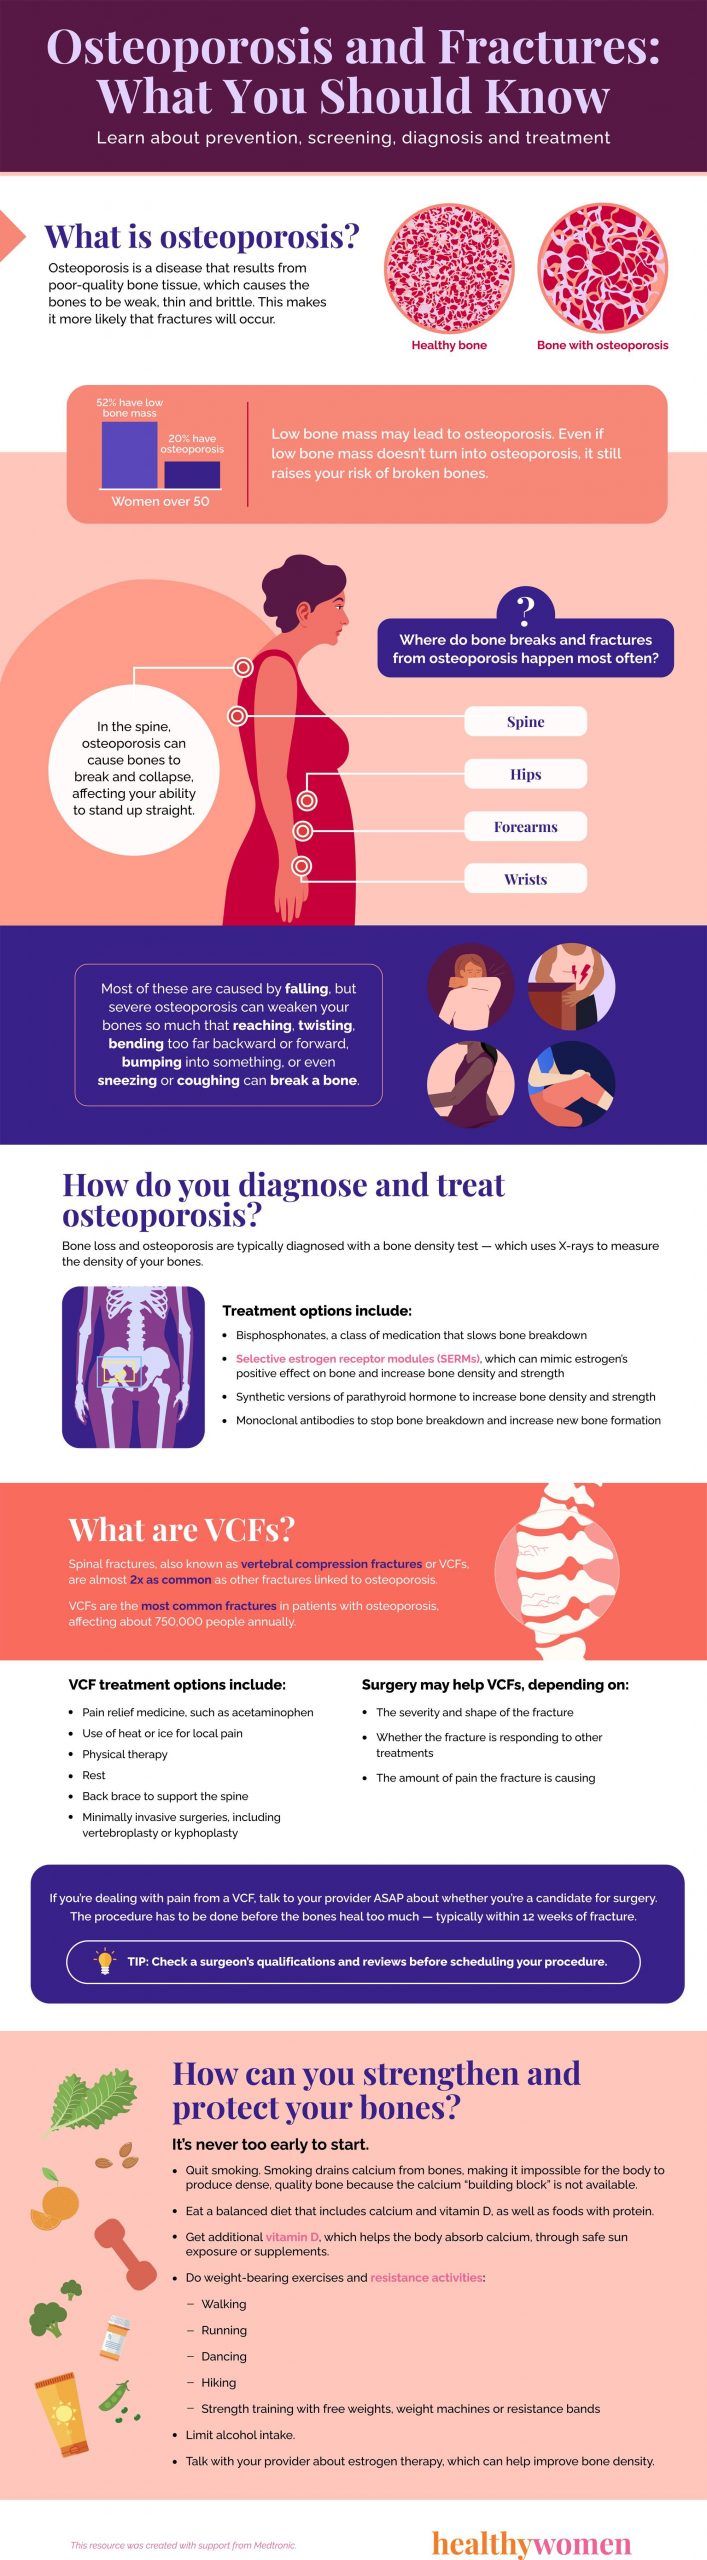 Infographic Osteoporosis and Fractures: What You Should Know. Click the image to open the PDF